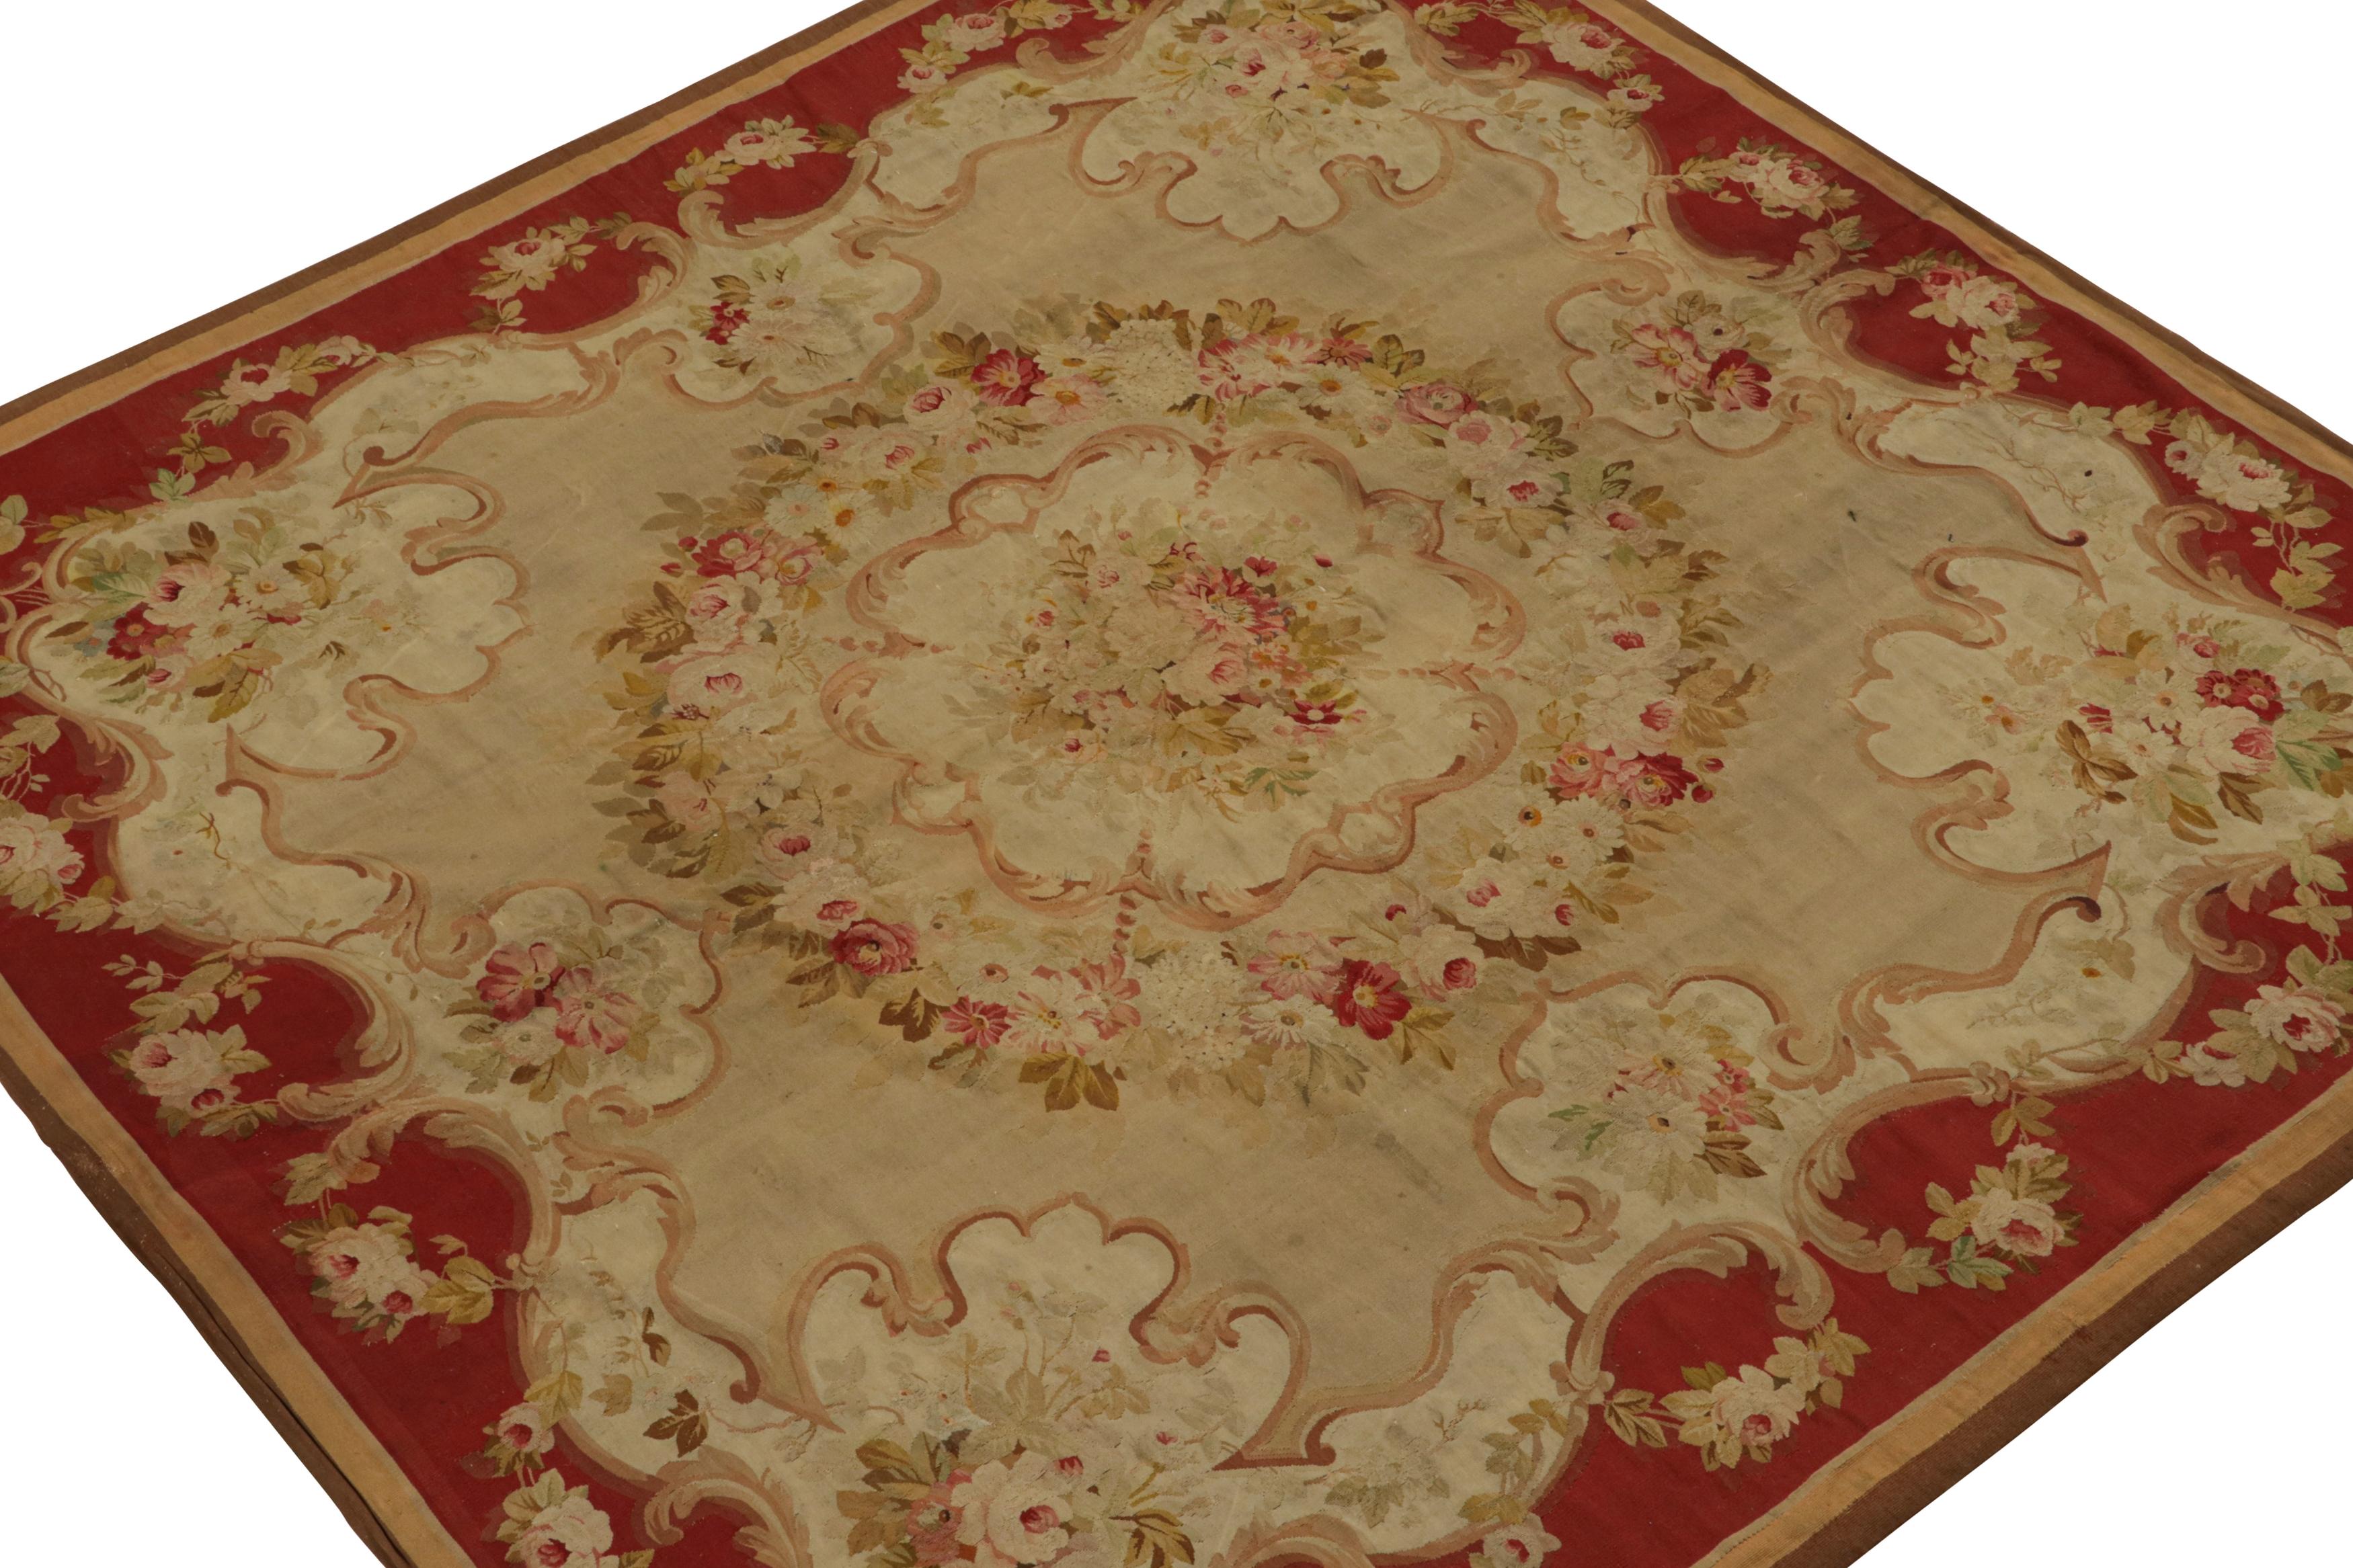 Handwoven in wool, circa 1890-1900, this 6x7 antique Aubusson flatweave rug in rich tones of beige and red, features floral medallions matching those in the spandrels, making it an elegant neoclassical artwork. 

On the design: 

As an exciting